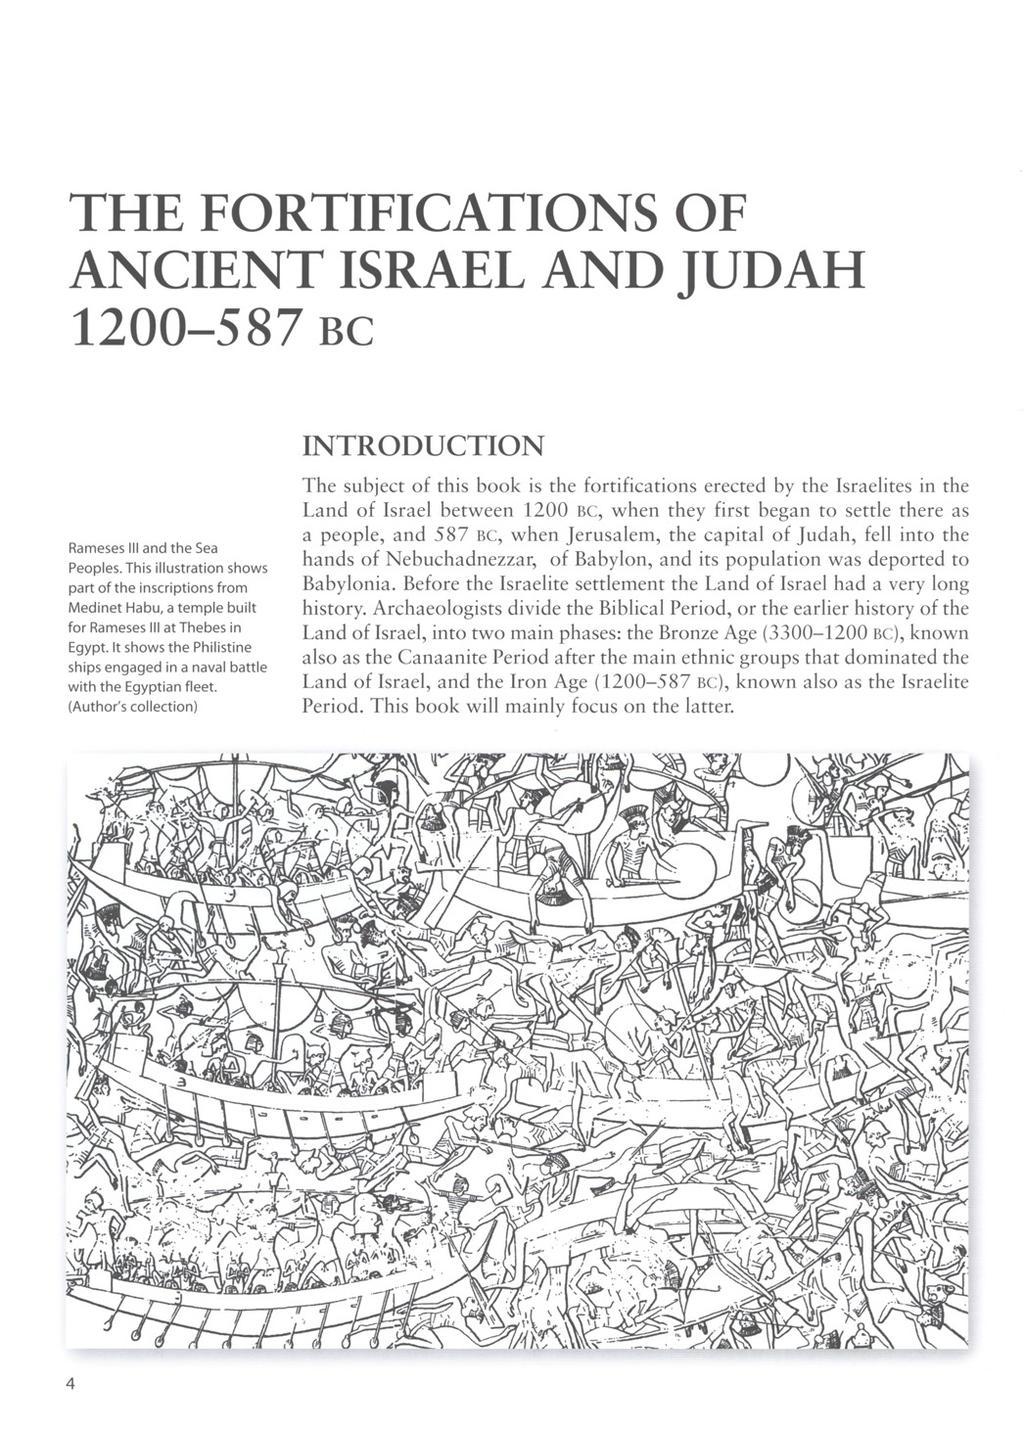 THE FORTIFICATIONS OF ANCIENT ISRAEL AND JUDAH 1200-587 BC Rameses III and the Sea Peoples.